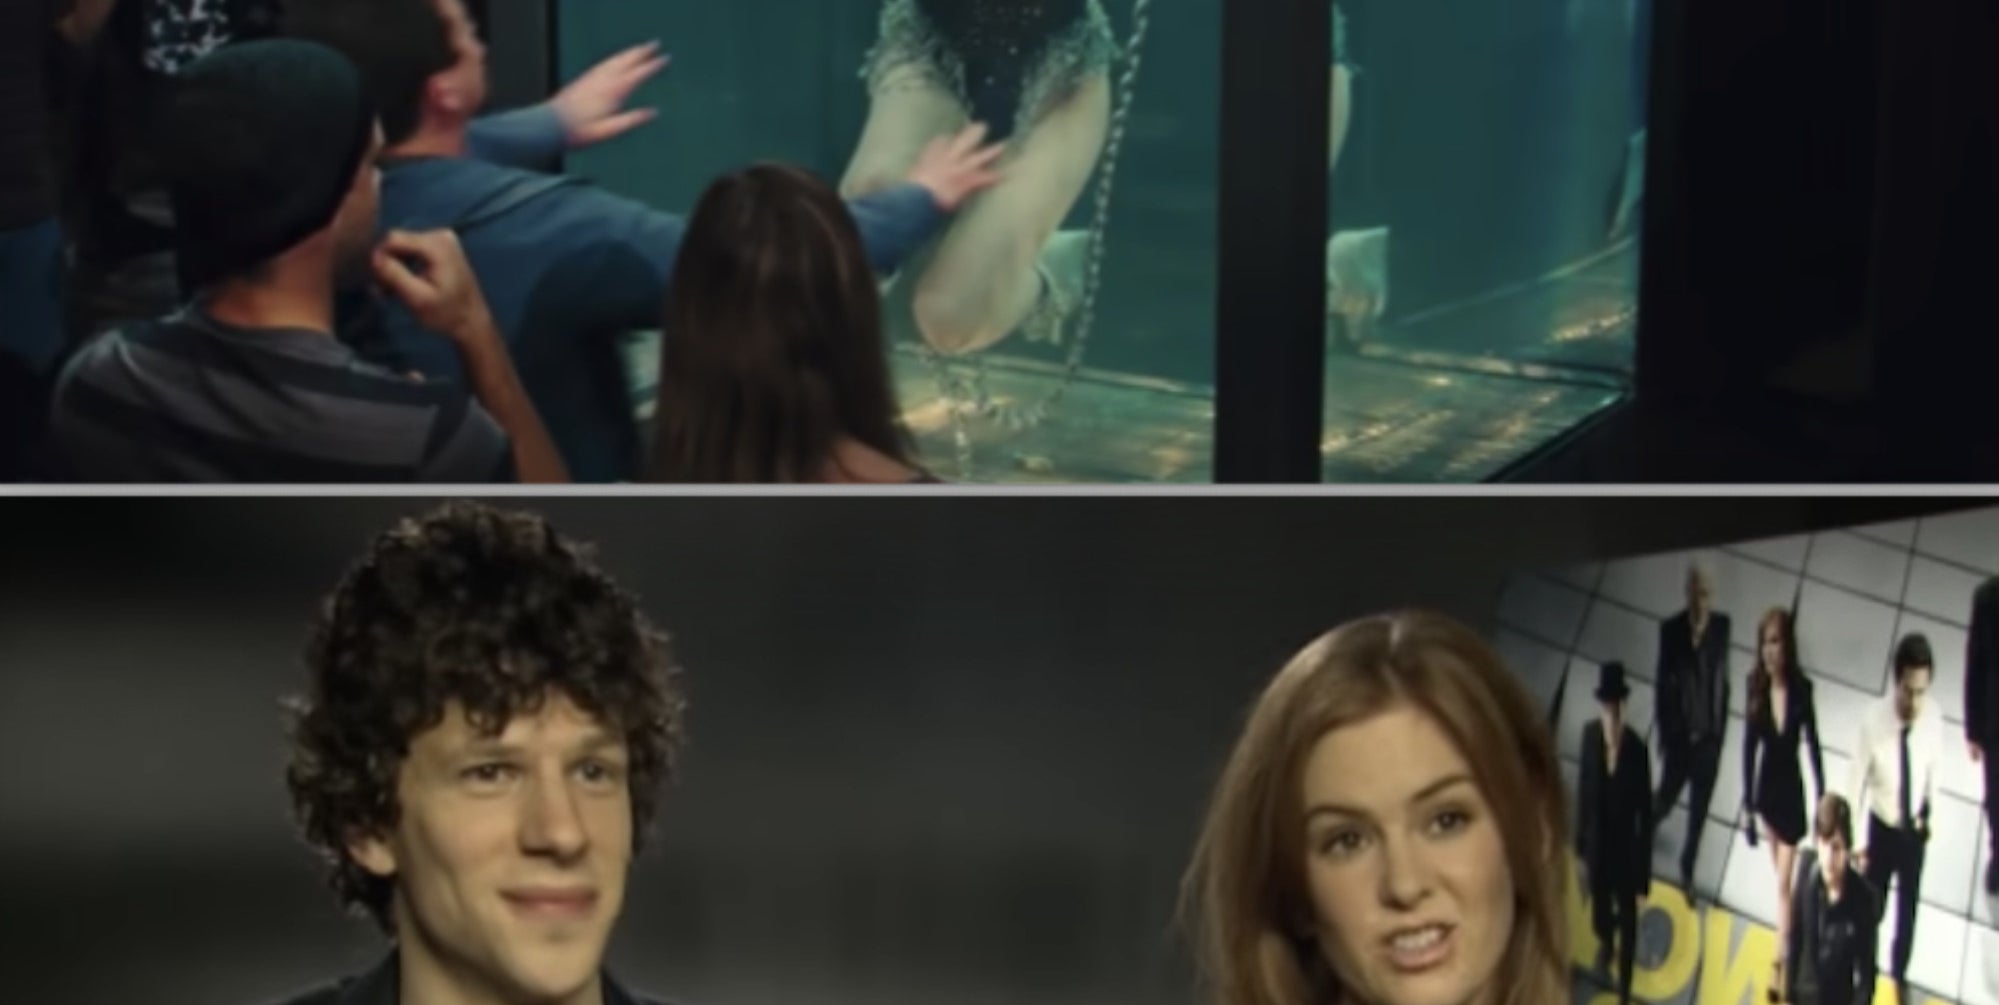 Isla Fisher trapped submerged in water in a cage in &quot;Now You See Me&quot;